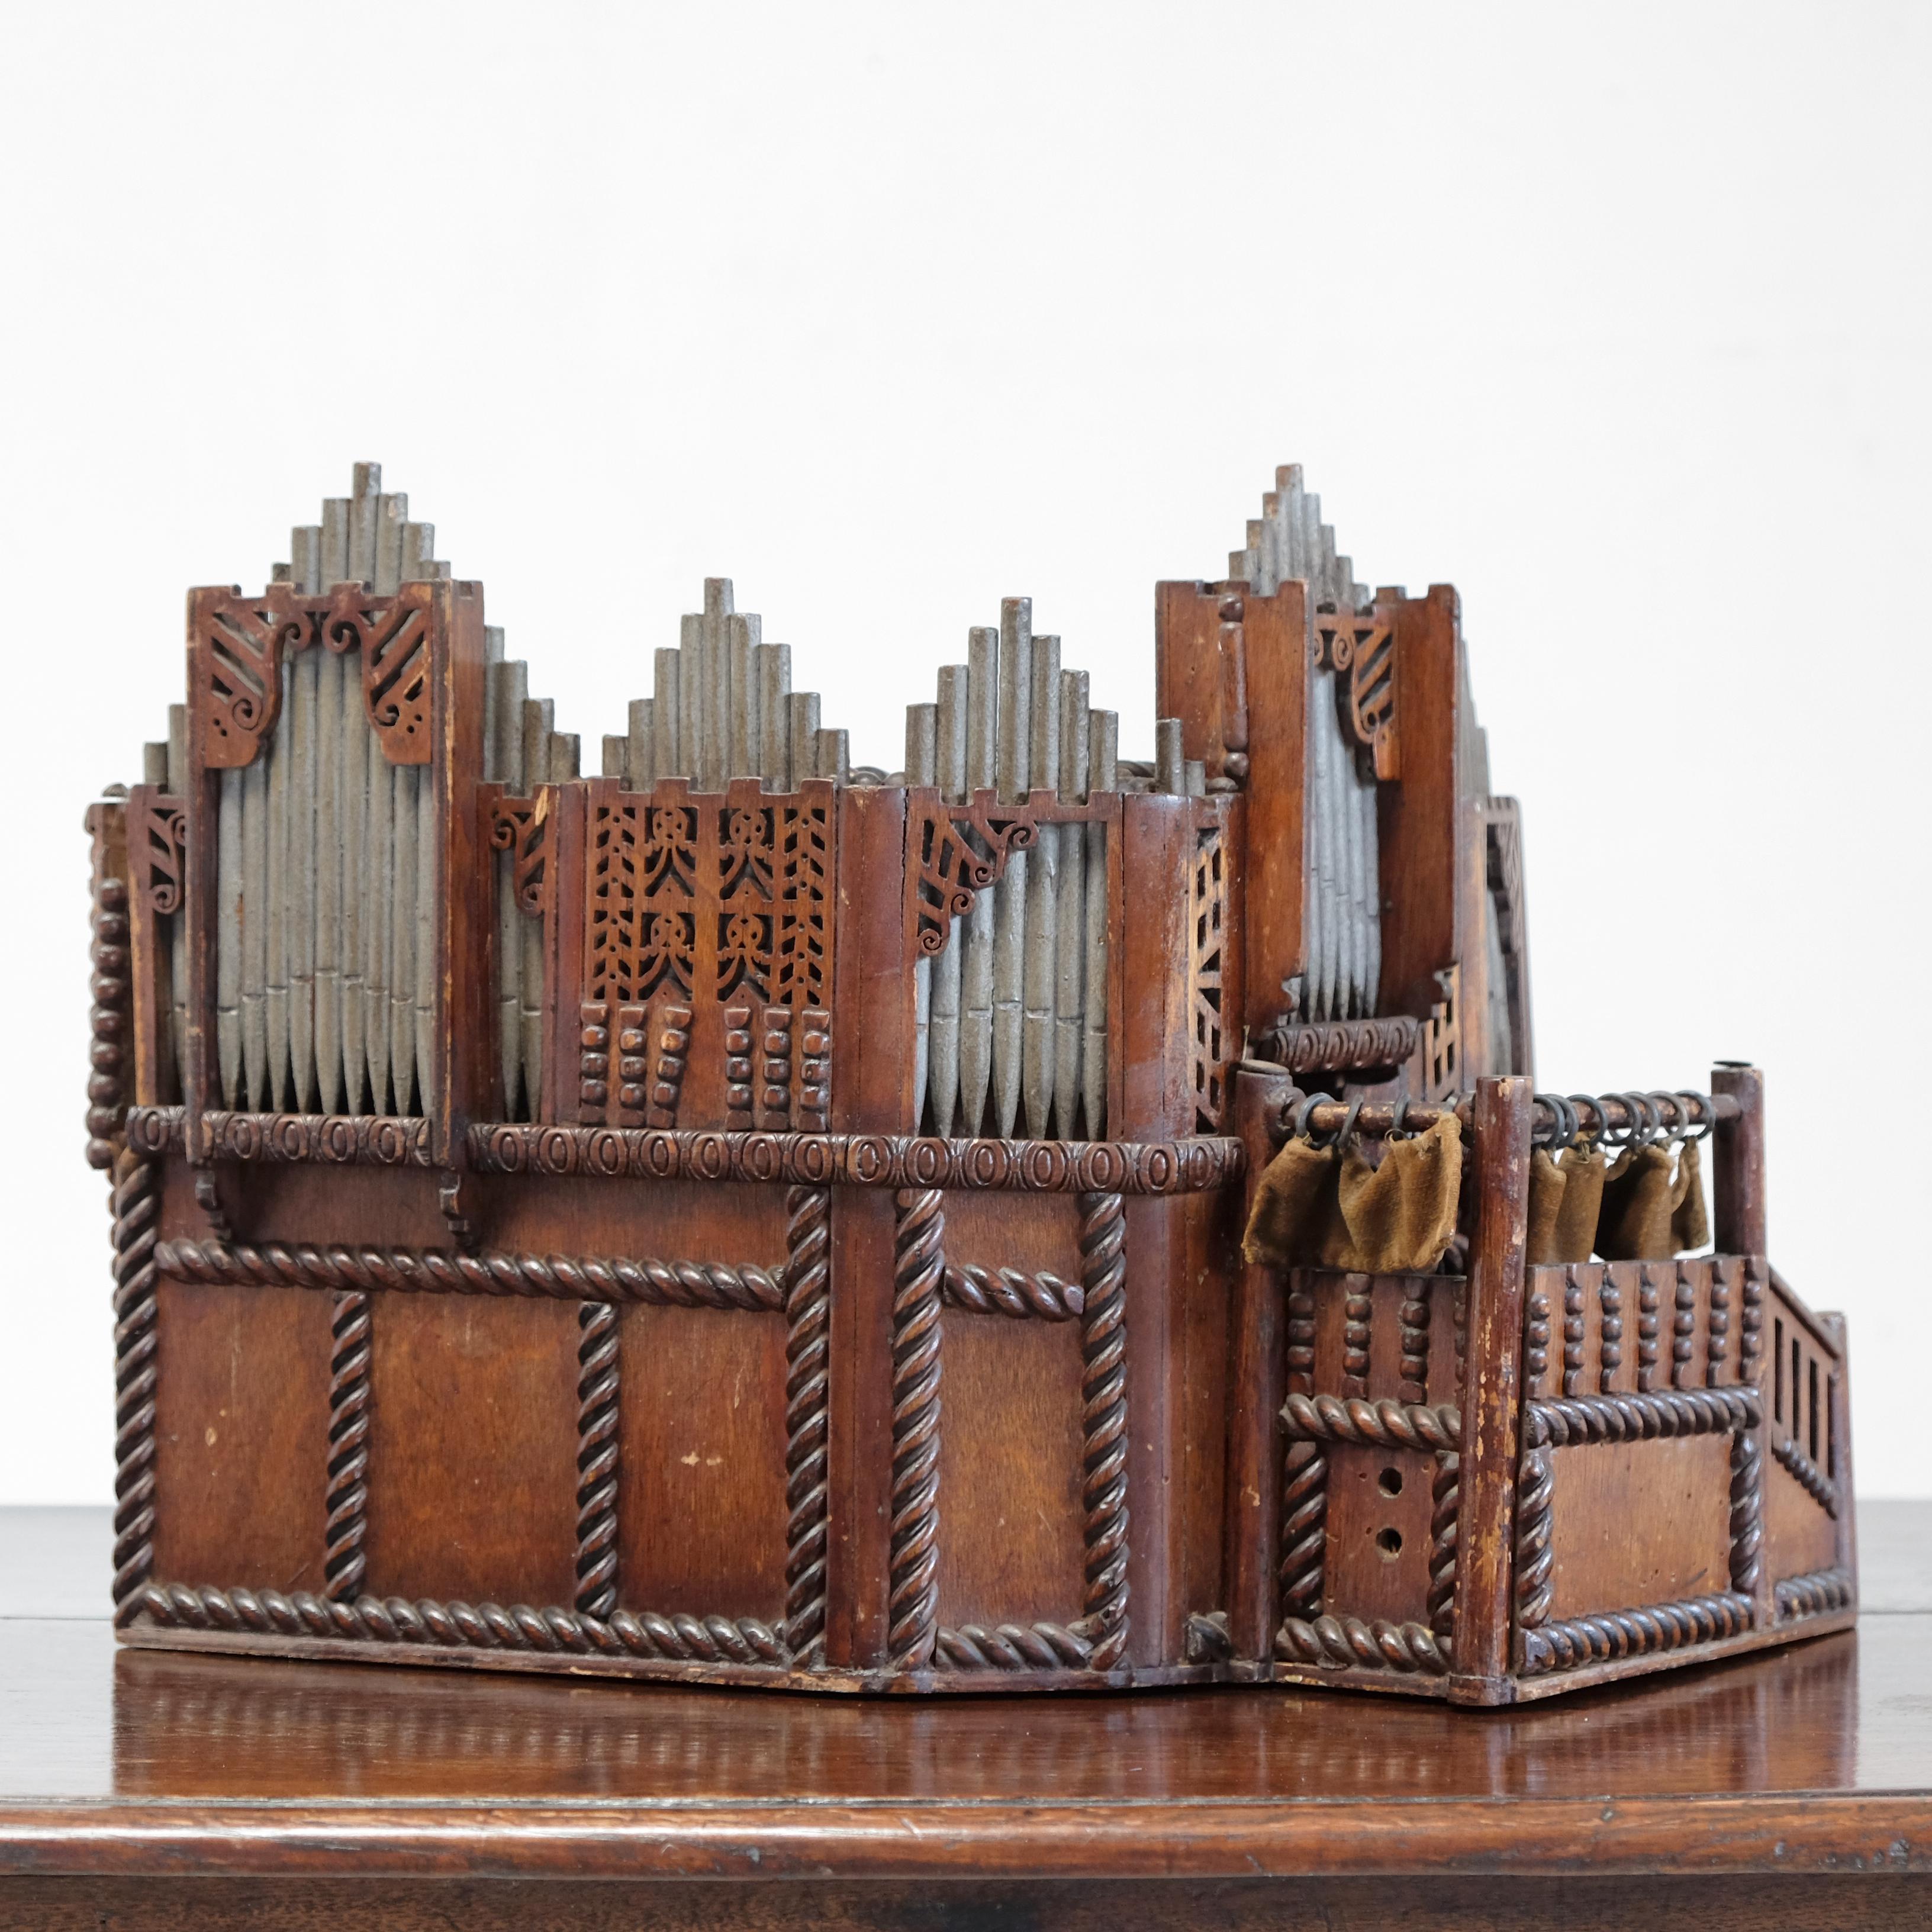 A charming scratch-built antique scale or architectural model of a large church or cathedral organ. Constructed in mixed timbers, it was originally used as a donation box - there is a coin slot in the top and internally there is the later addition